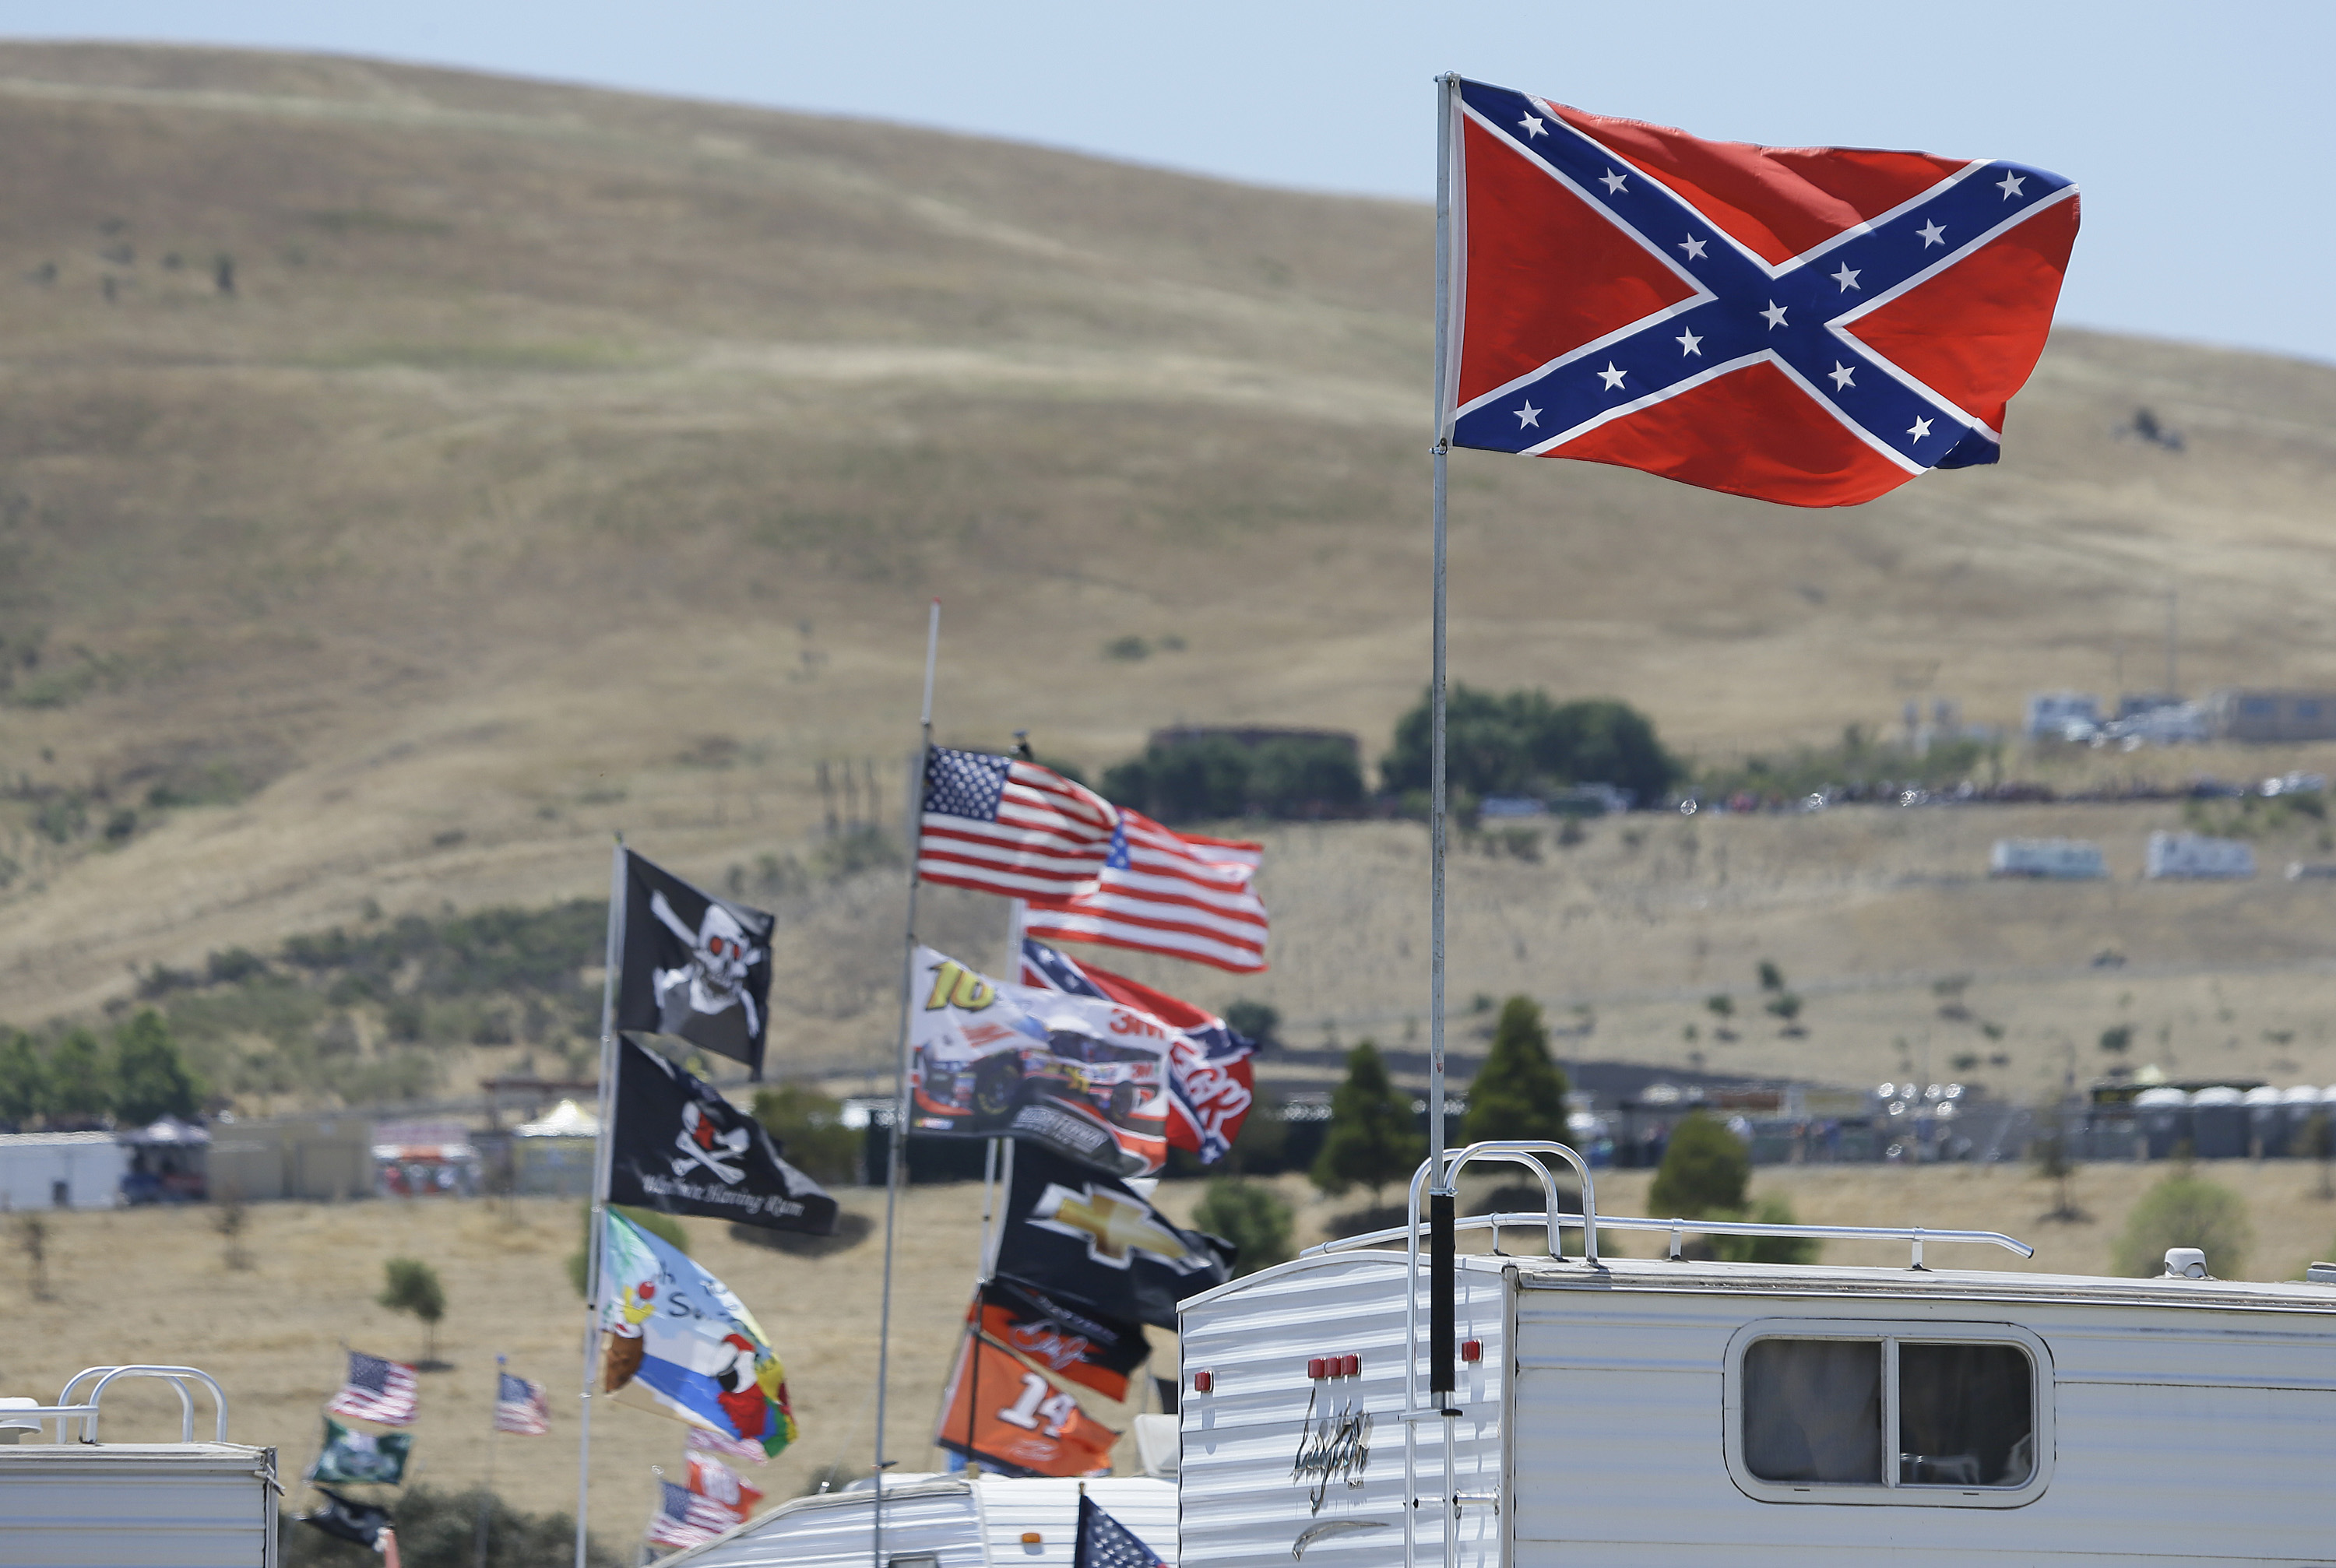 A Confederate-themed flag flies atop an RV at the NASCAR race in June's Sonoma. (AP)